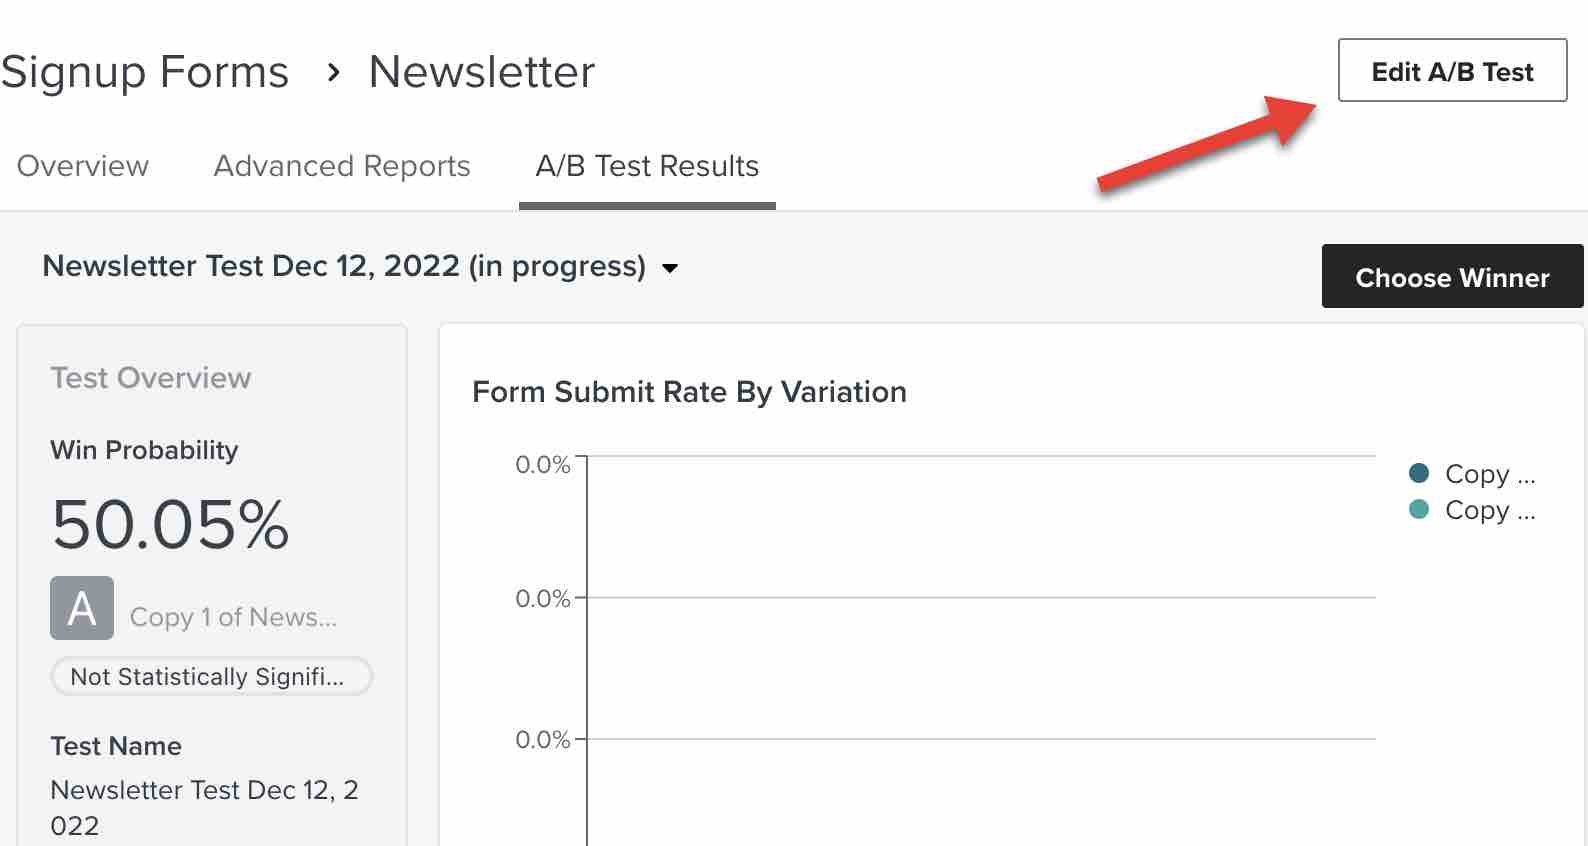 On the A/B test results page, click edit A/B test to edit the test name and notes.